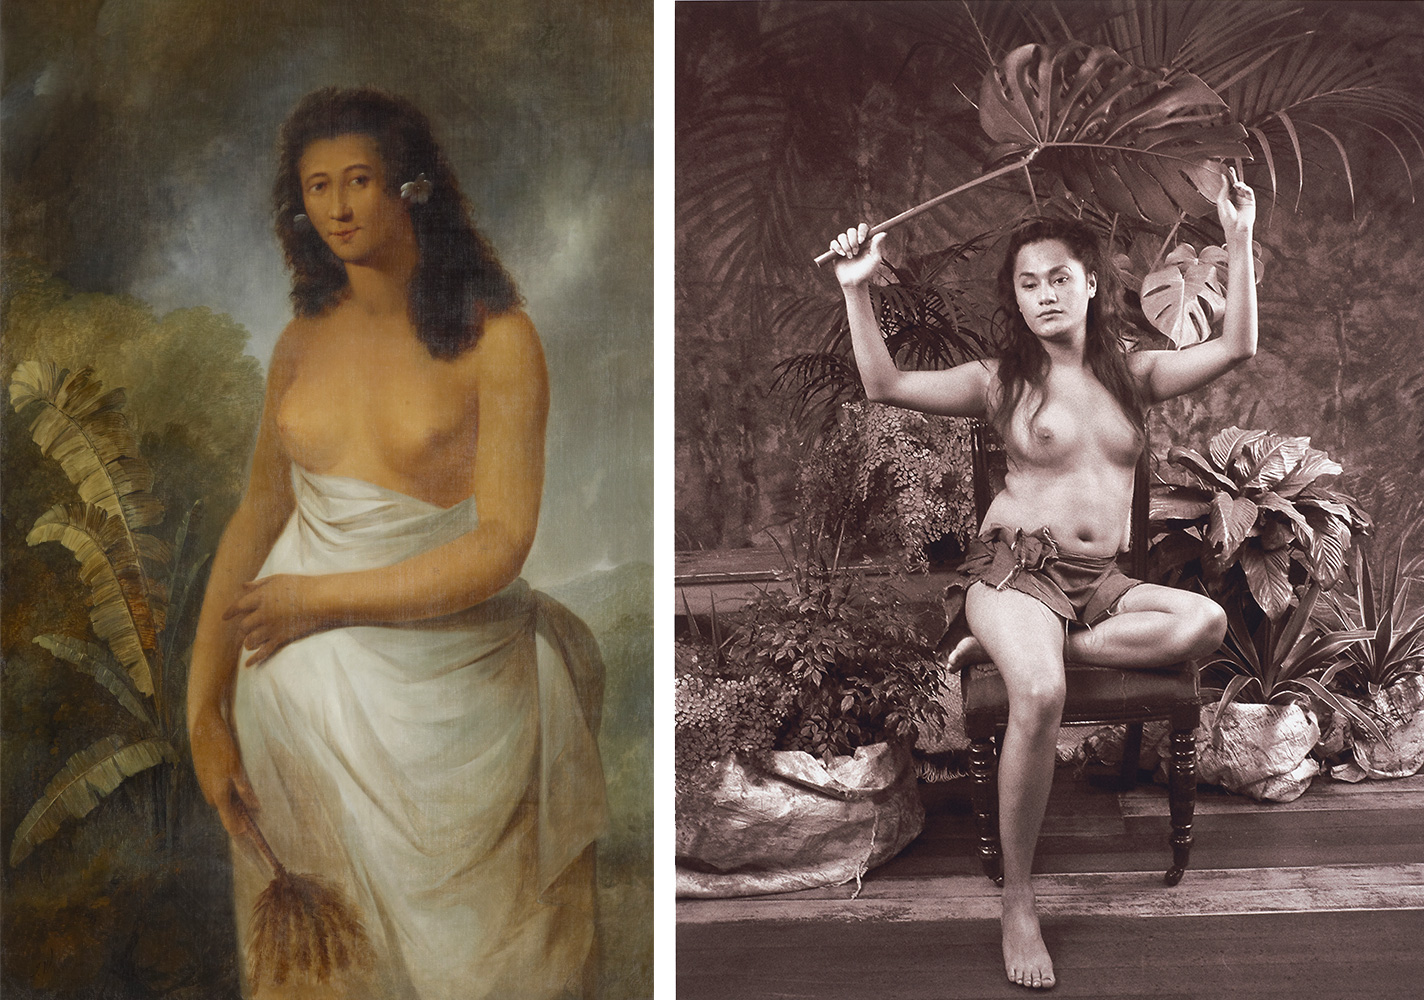 A painting of a bare-chested lady from the society islands next to a photograph of a Samoan lady half-dresses